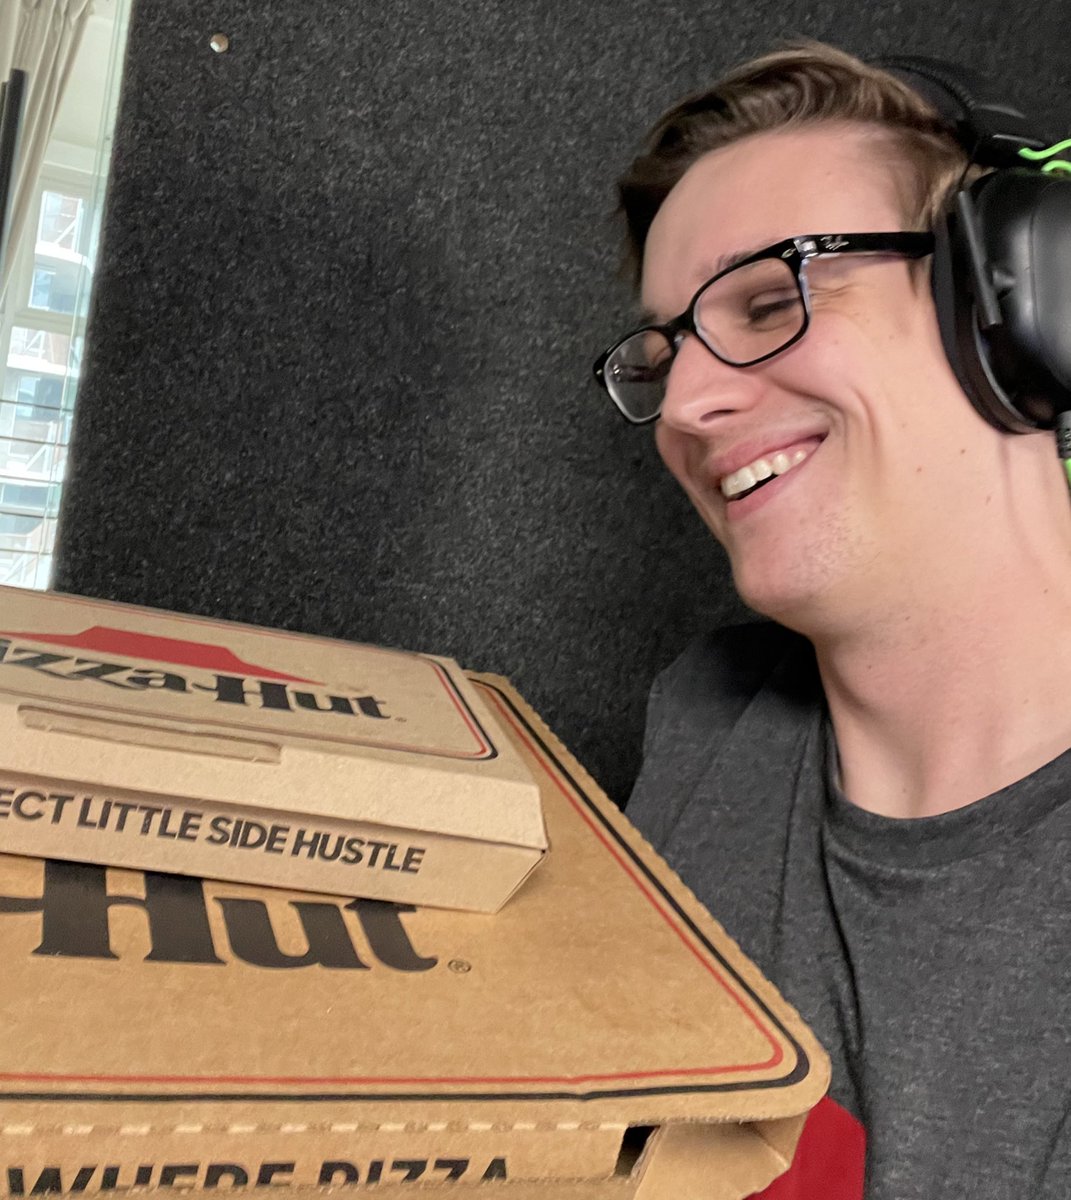 It's time for a @PizzaHut party! My new series Friday Night Bites starts tonight and I have @jonsandman and @HannahStocking along for the ride. Tune in! #fridaynightbites #pizzahutpartner twitch.tv/jericho